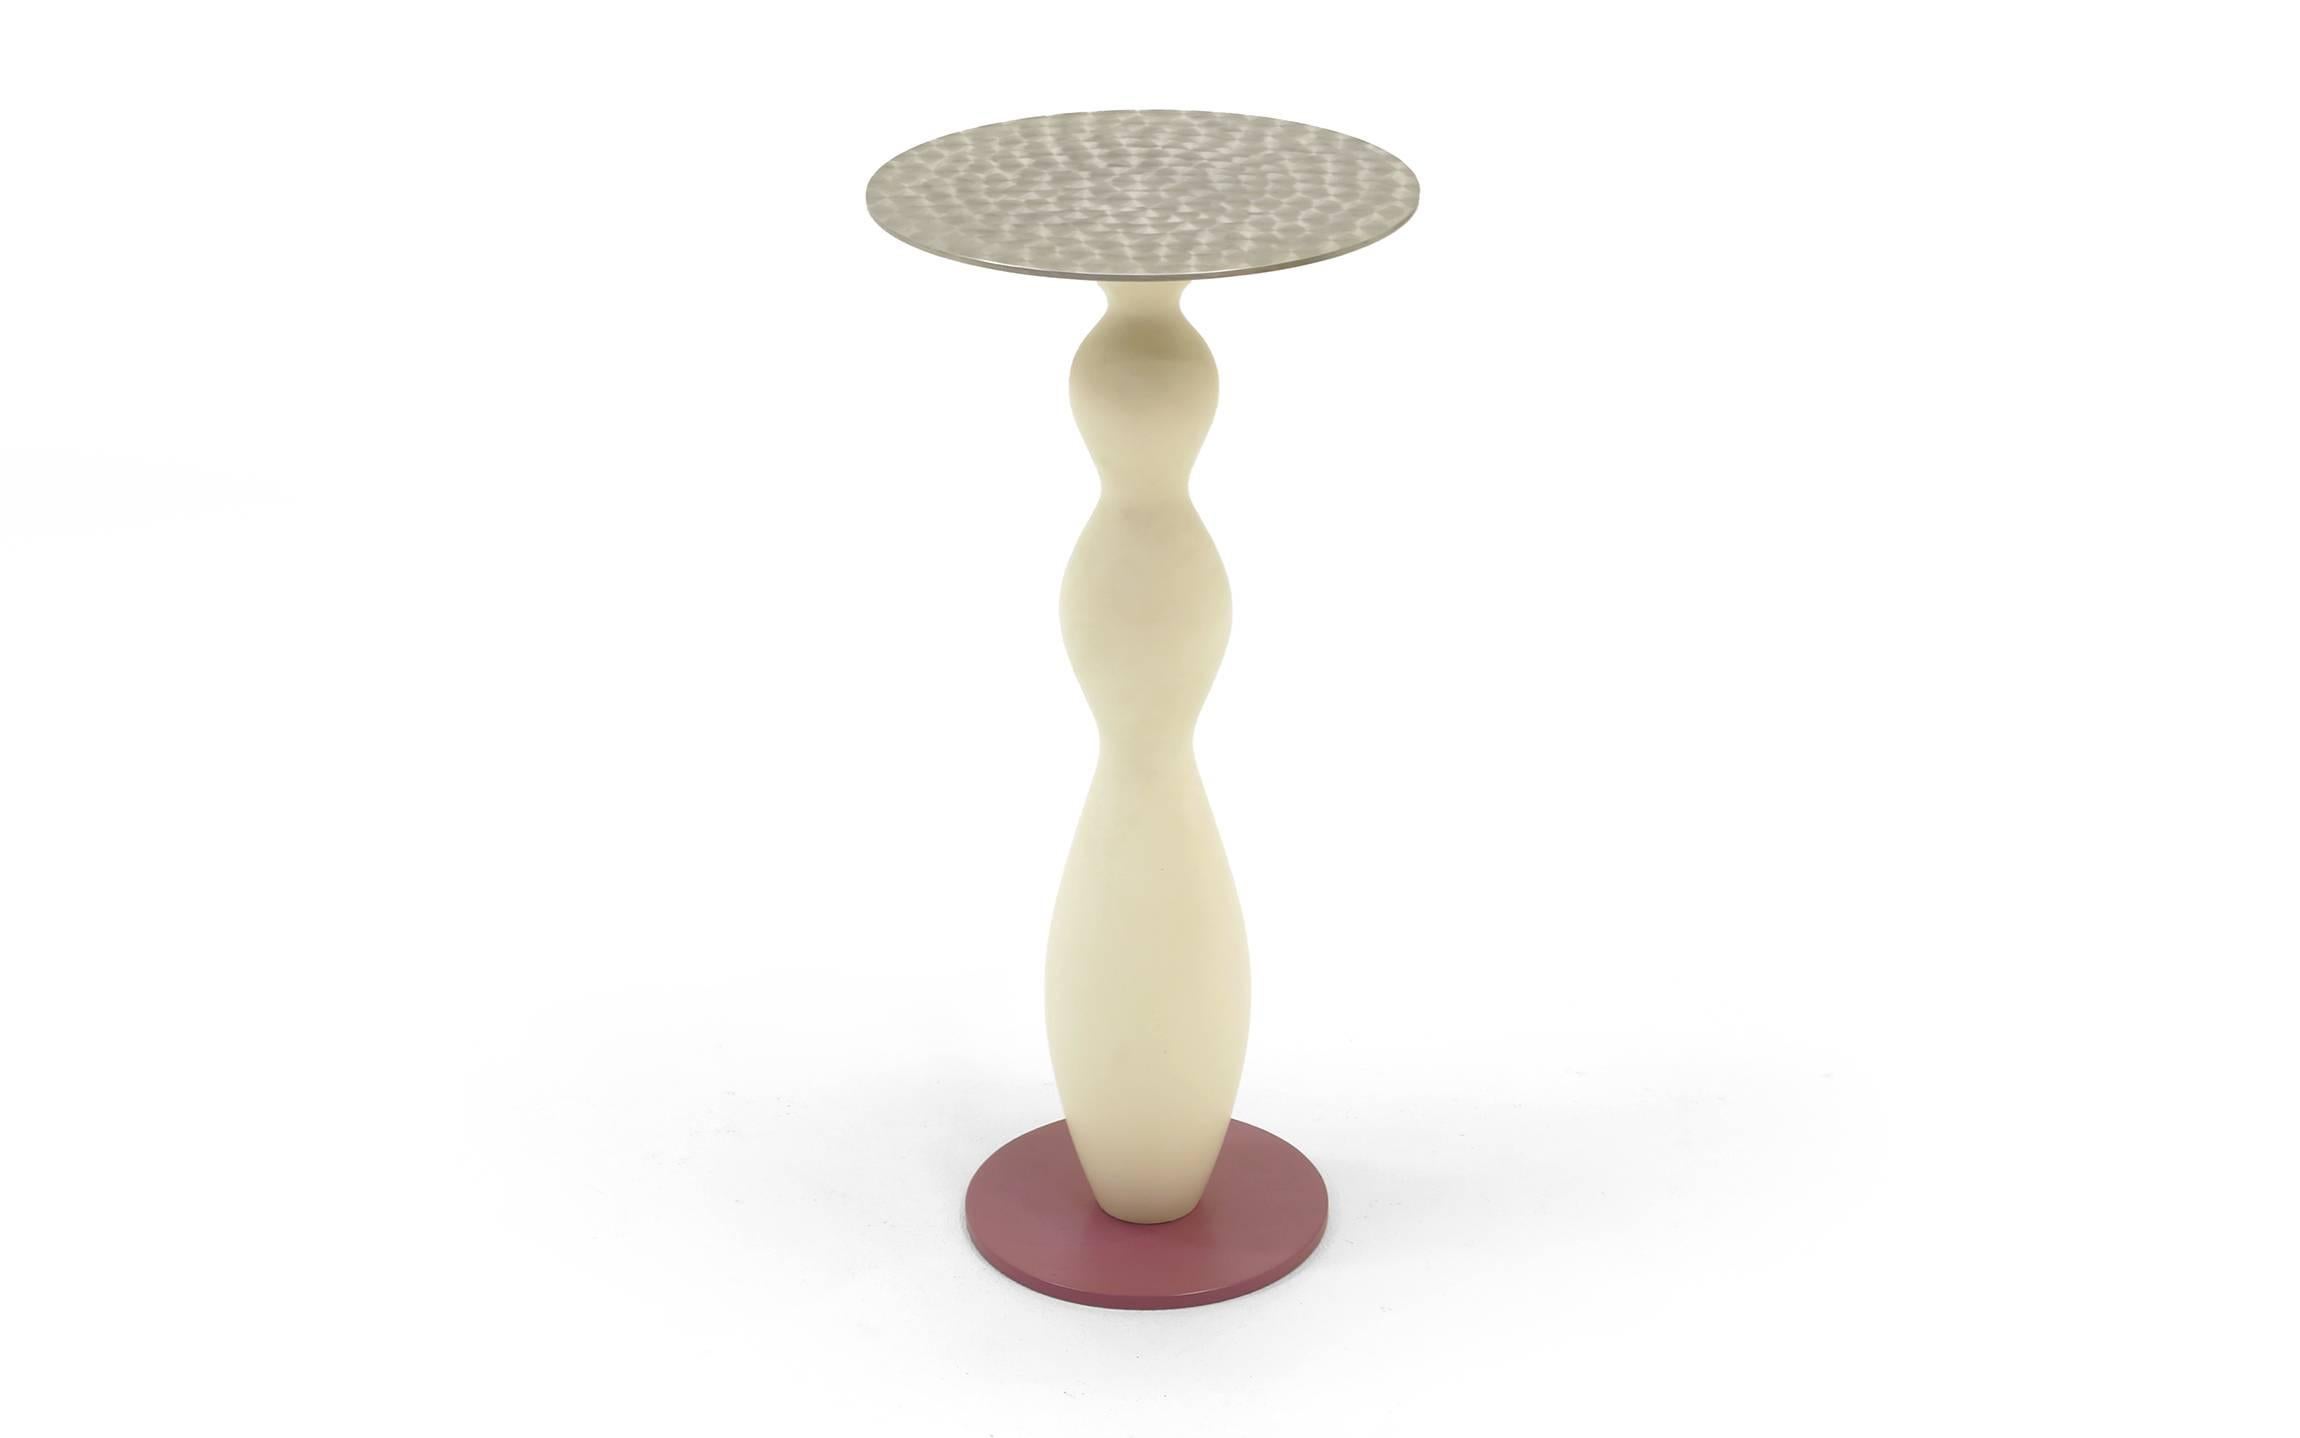 Occasional table designed by Marco Zanuso for the Design Group Memphis founded by Ettore Sottsass. Can be uses as a side table or pedestal as it is almost measures 29 inches tall. Signed with applied metal manufacturers label 